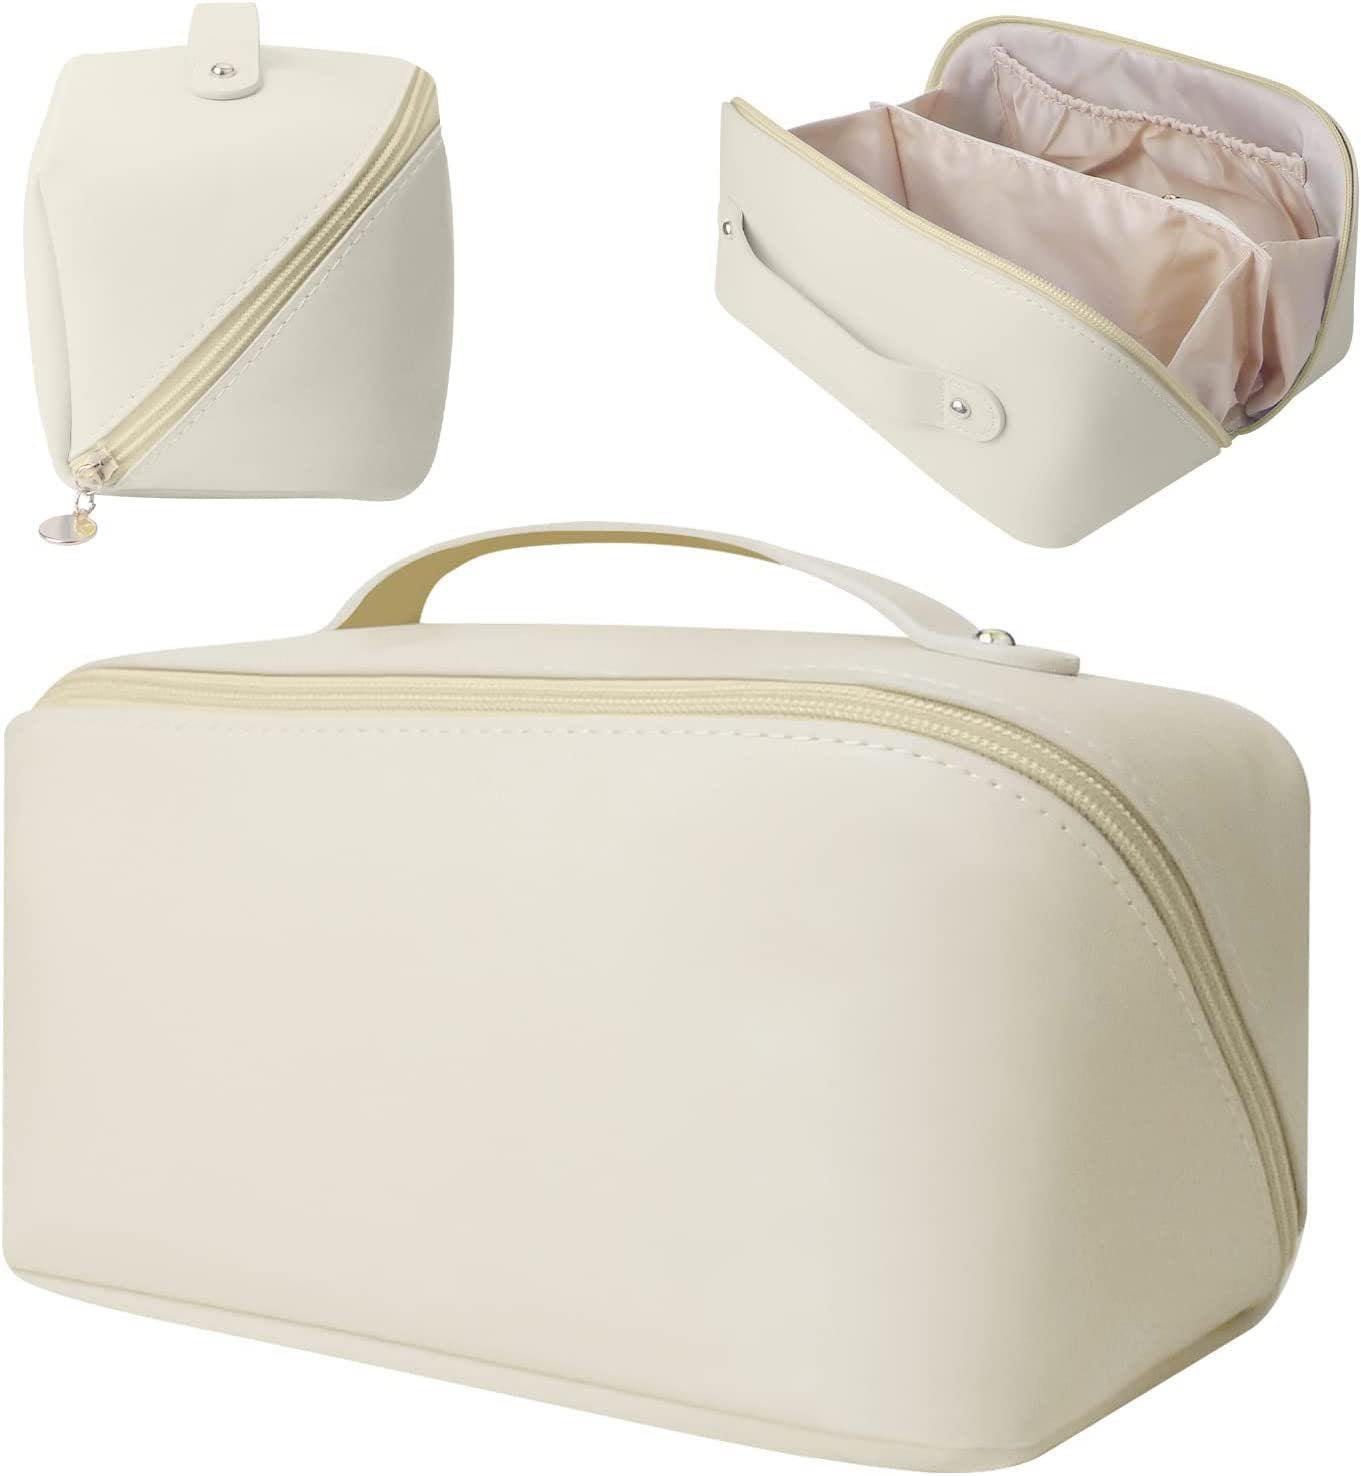 RTS Travel Toiletry Cosmetic Bag